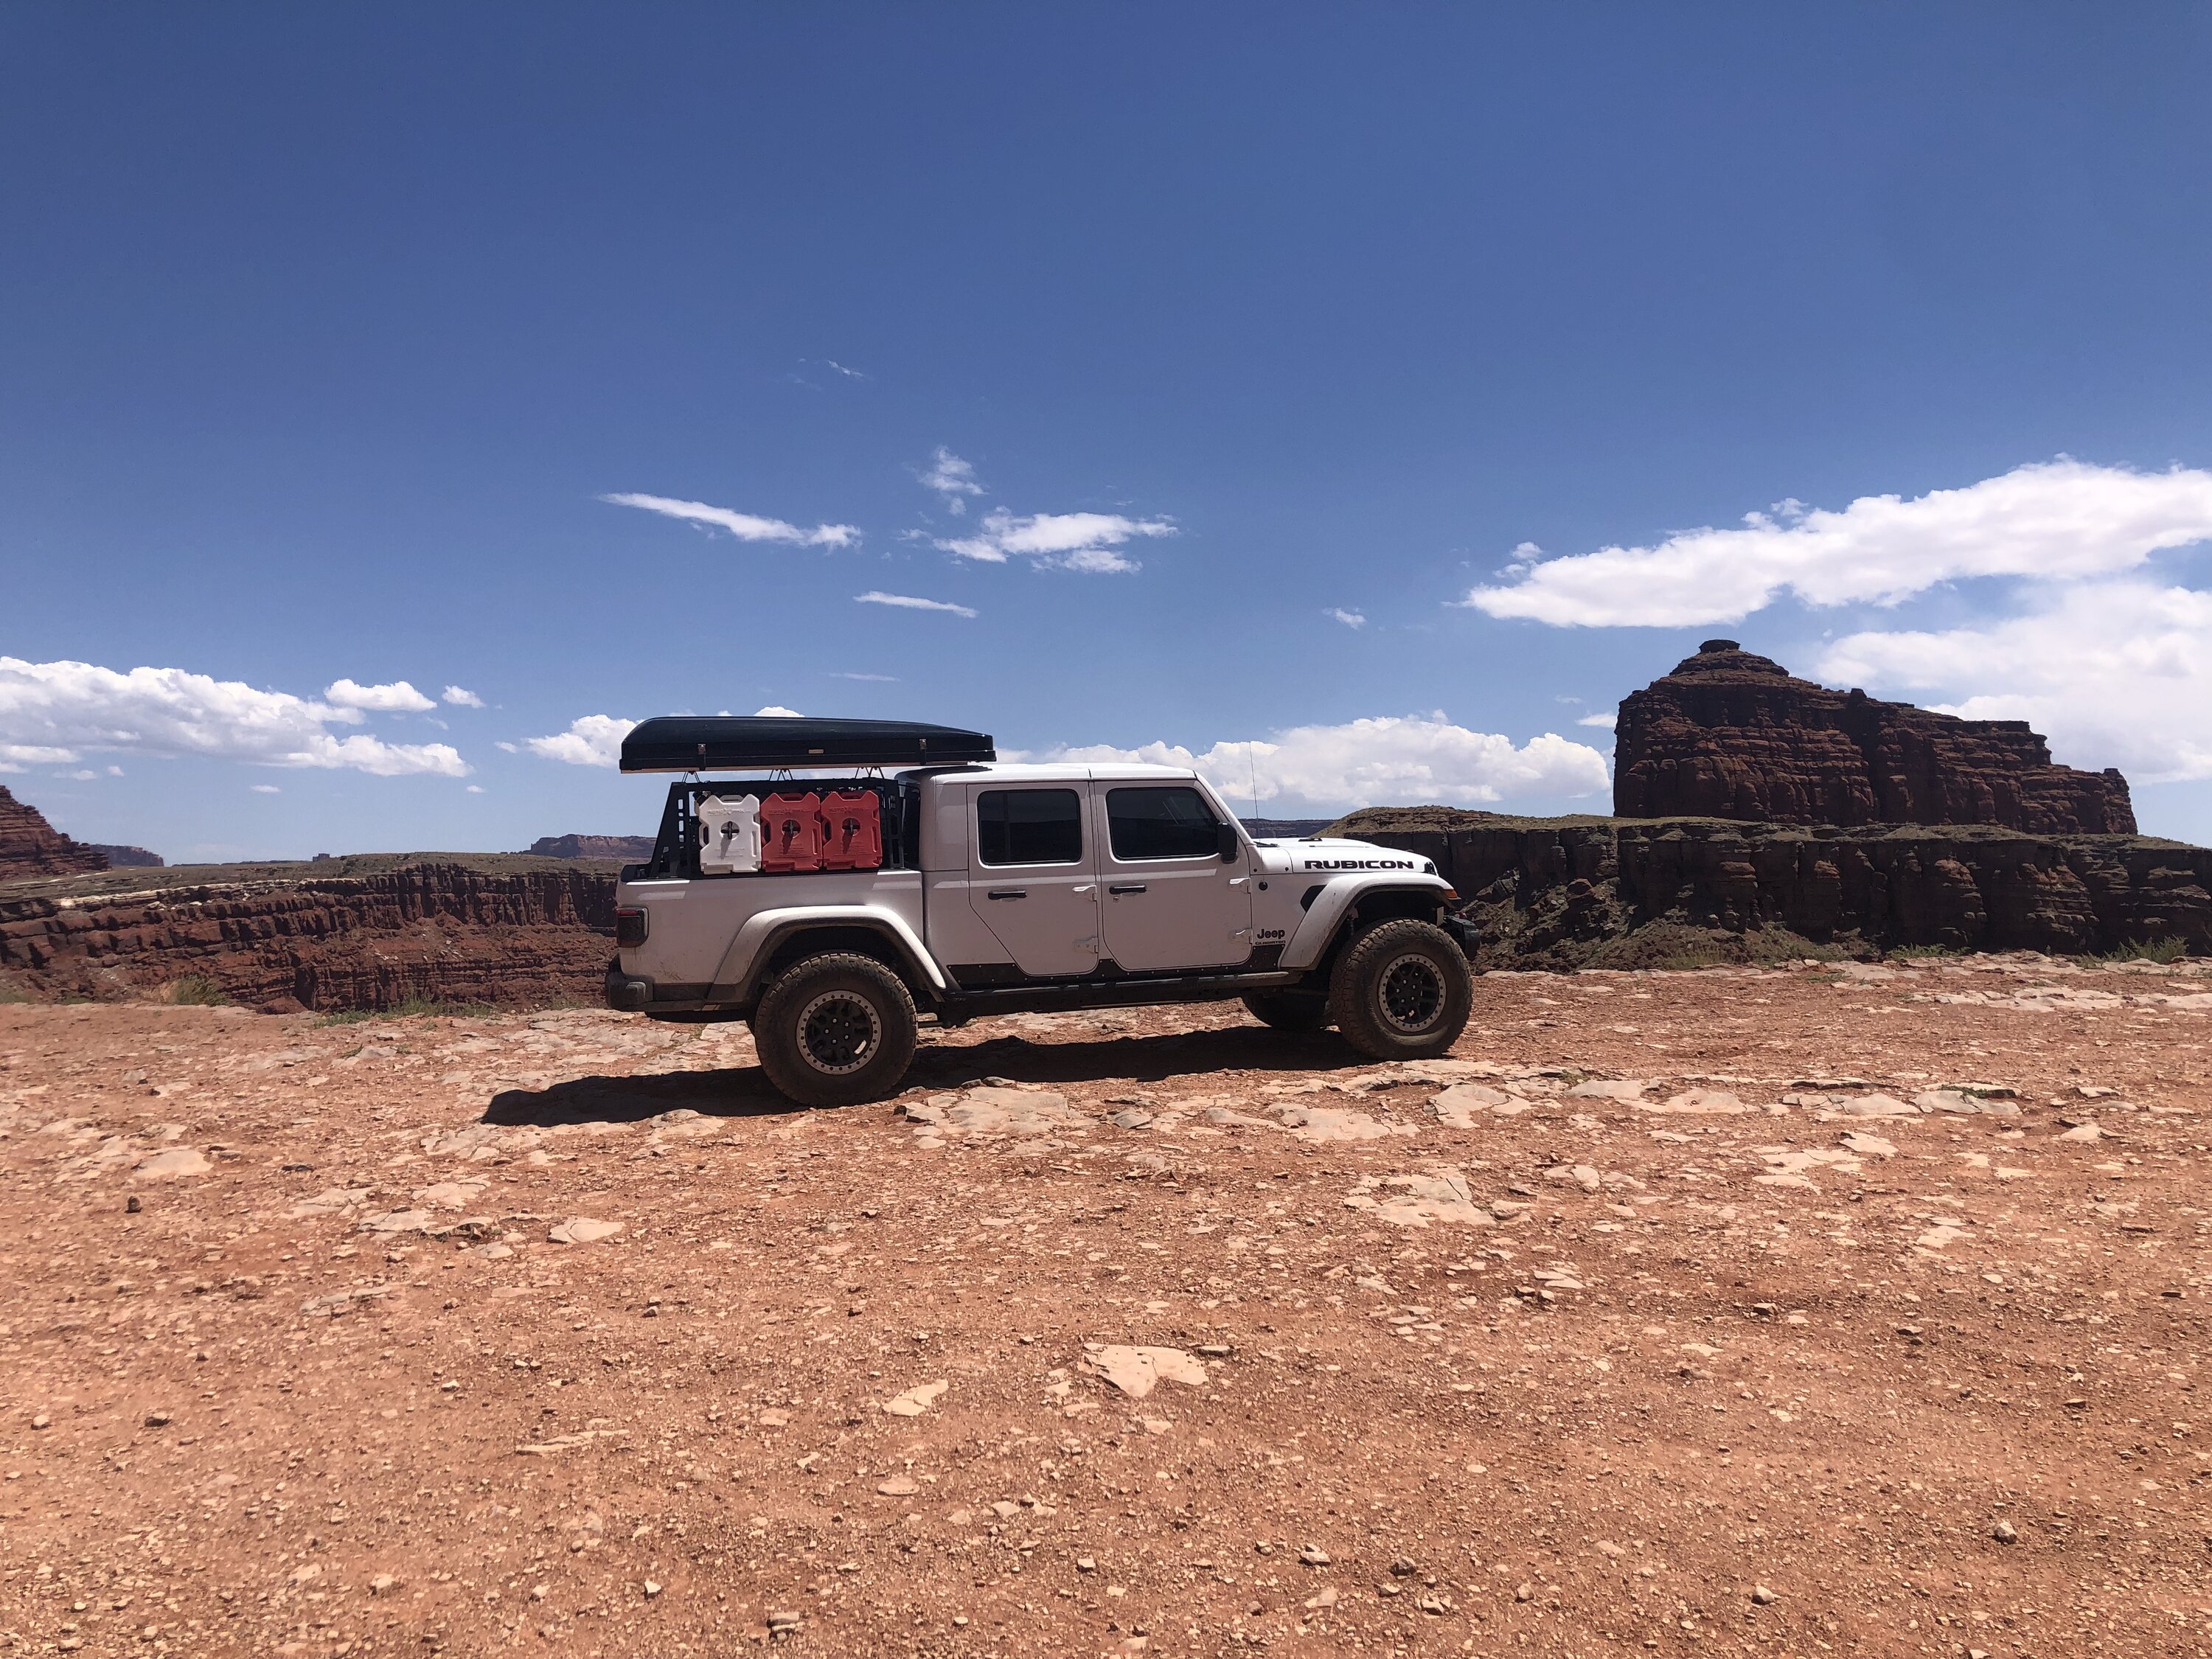 Jeep Gladiator From NW Louisiana to Silverton, CO to Moab and back in 10 days IMG_7251